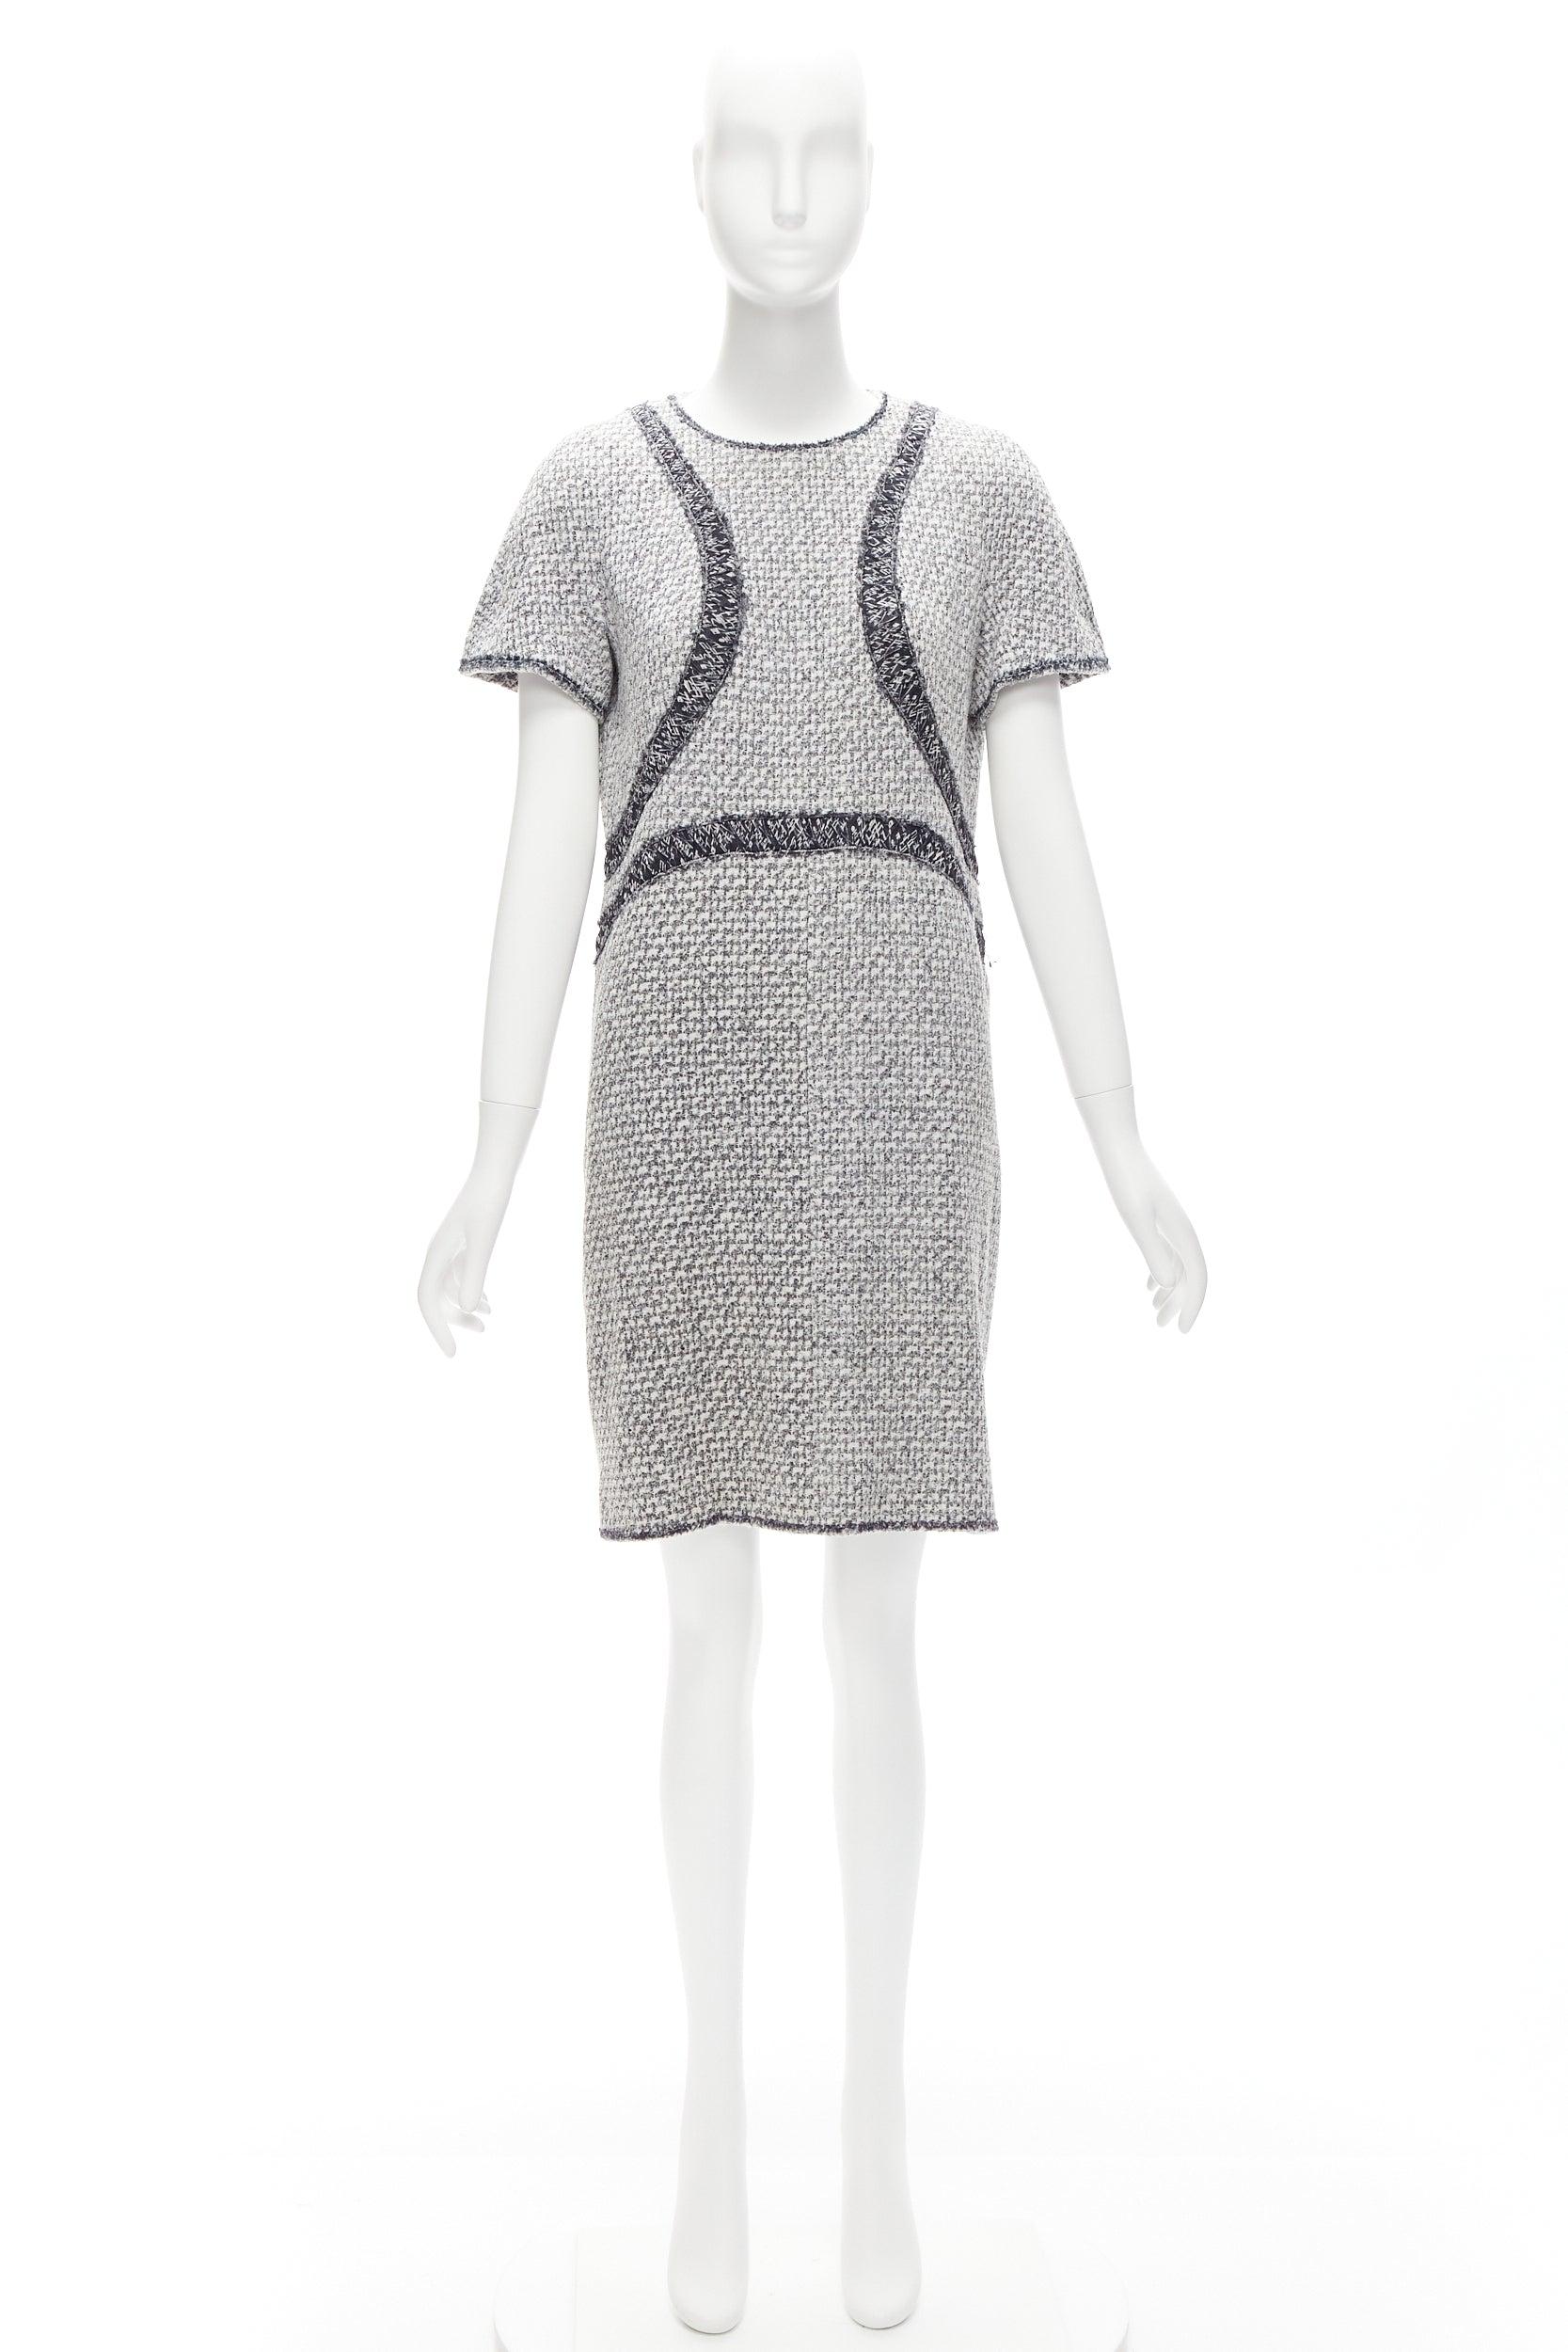 CHANEL 13P grey graphic panels Fantasy Tweed shift dress FR46 3XL For Sale 3